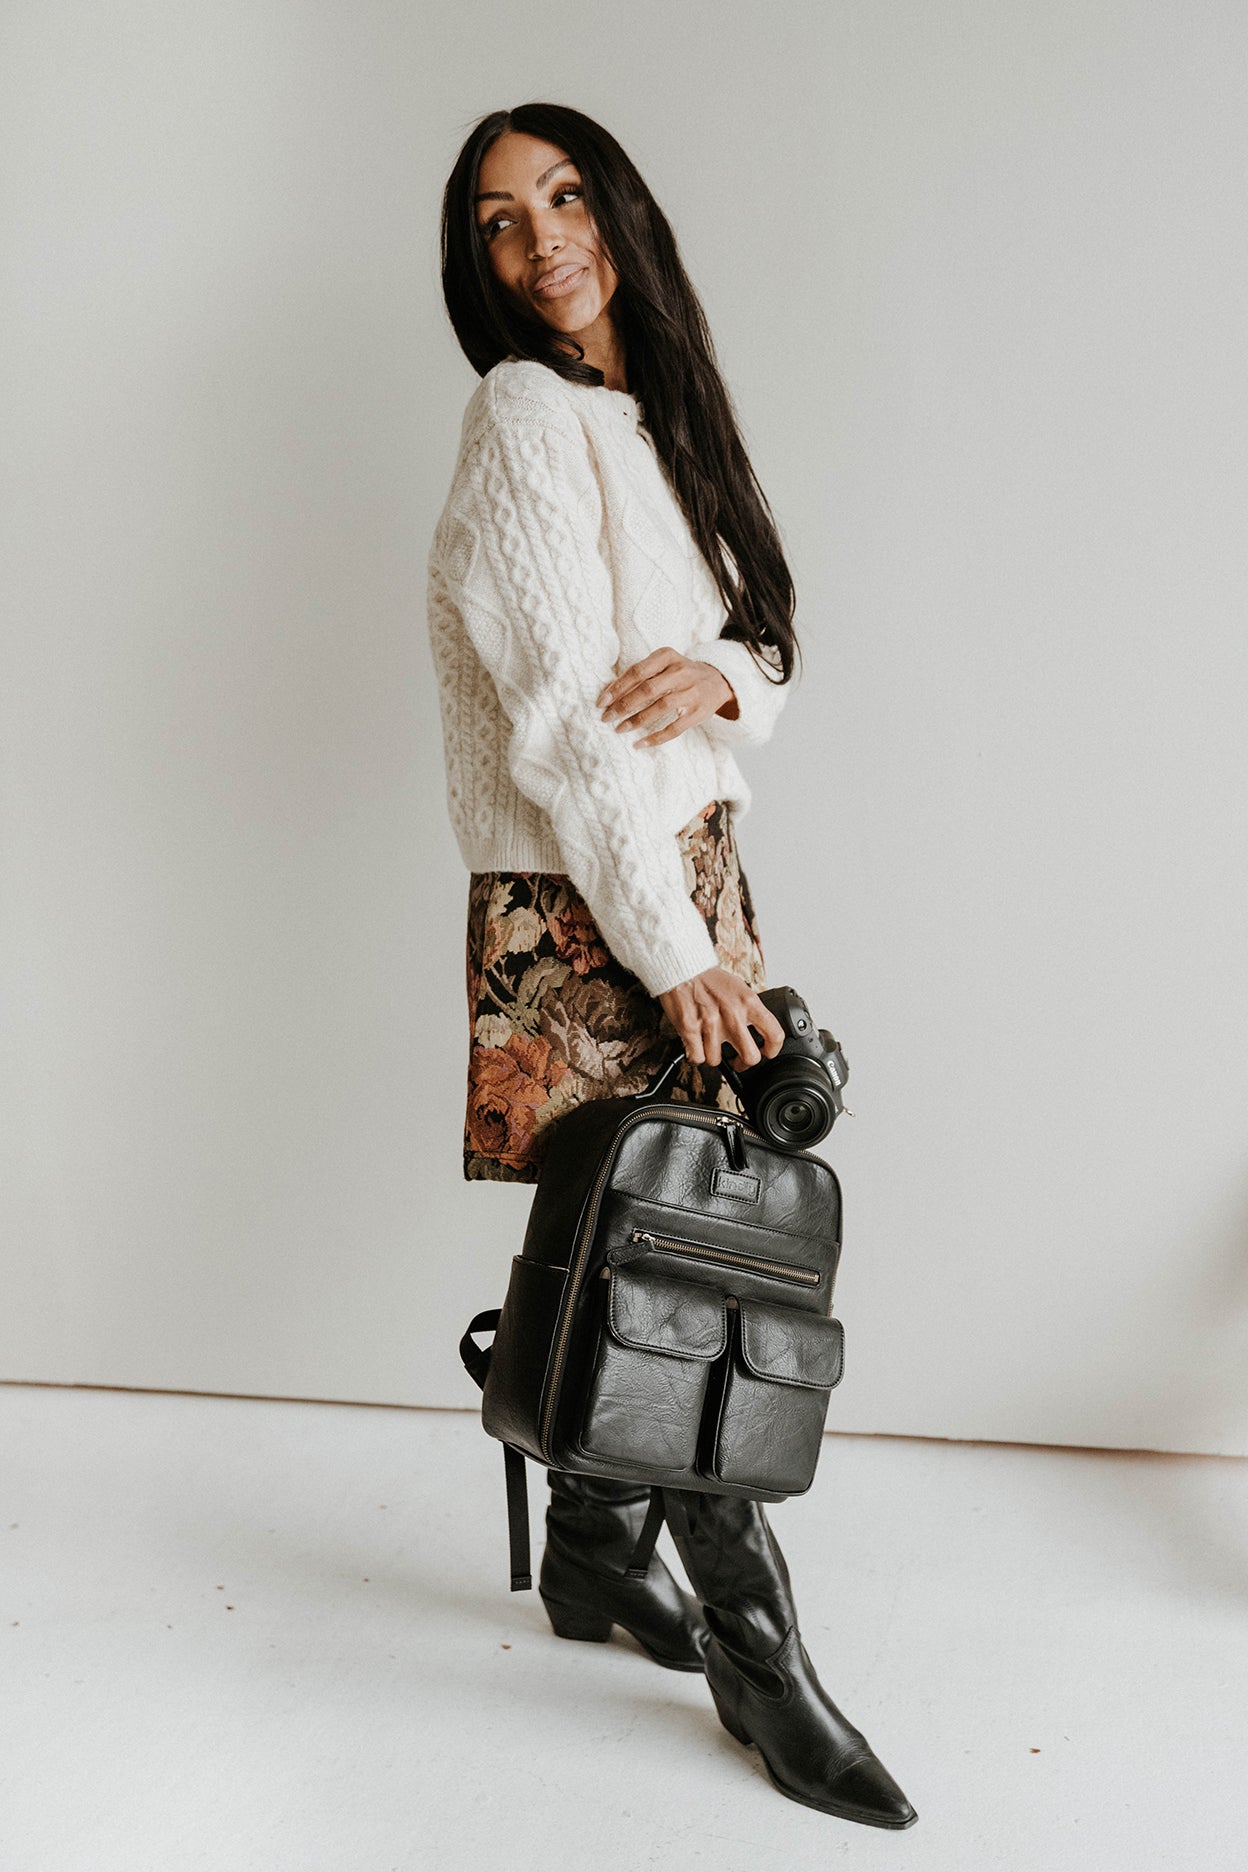 The Jenessa Midi- Our Mid-Size Camera Backpack